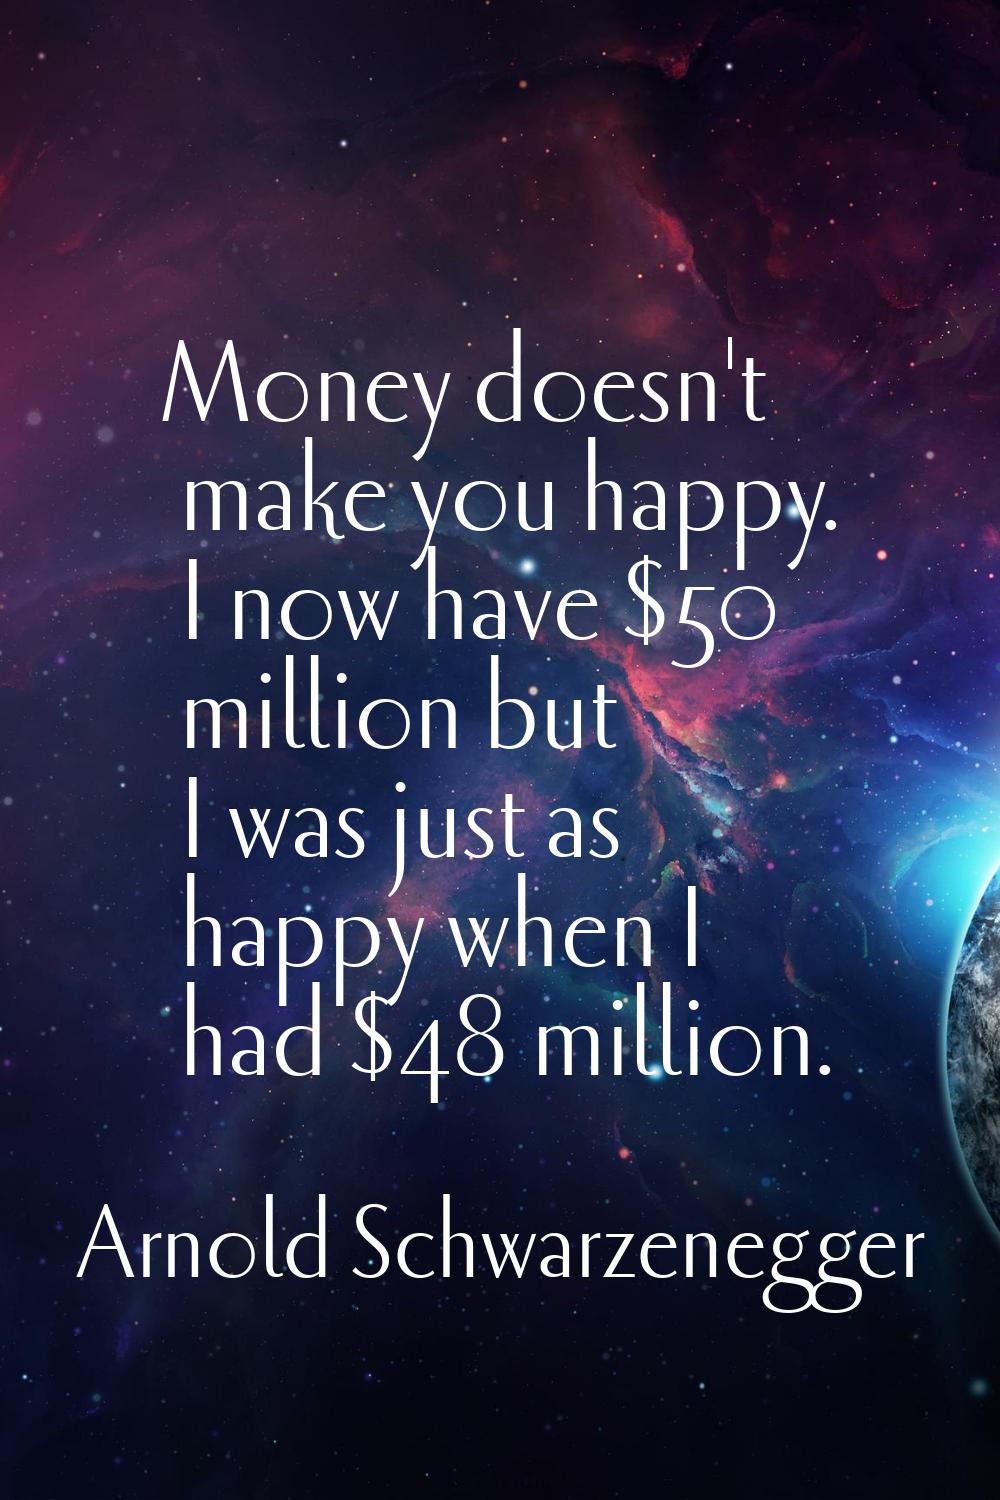 Money doesn't make you happy. I now have $50 million but I was just as happy when I had $48 million